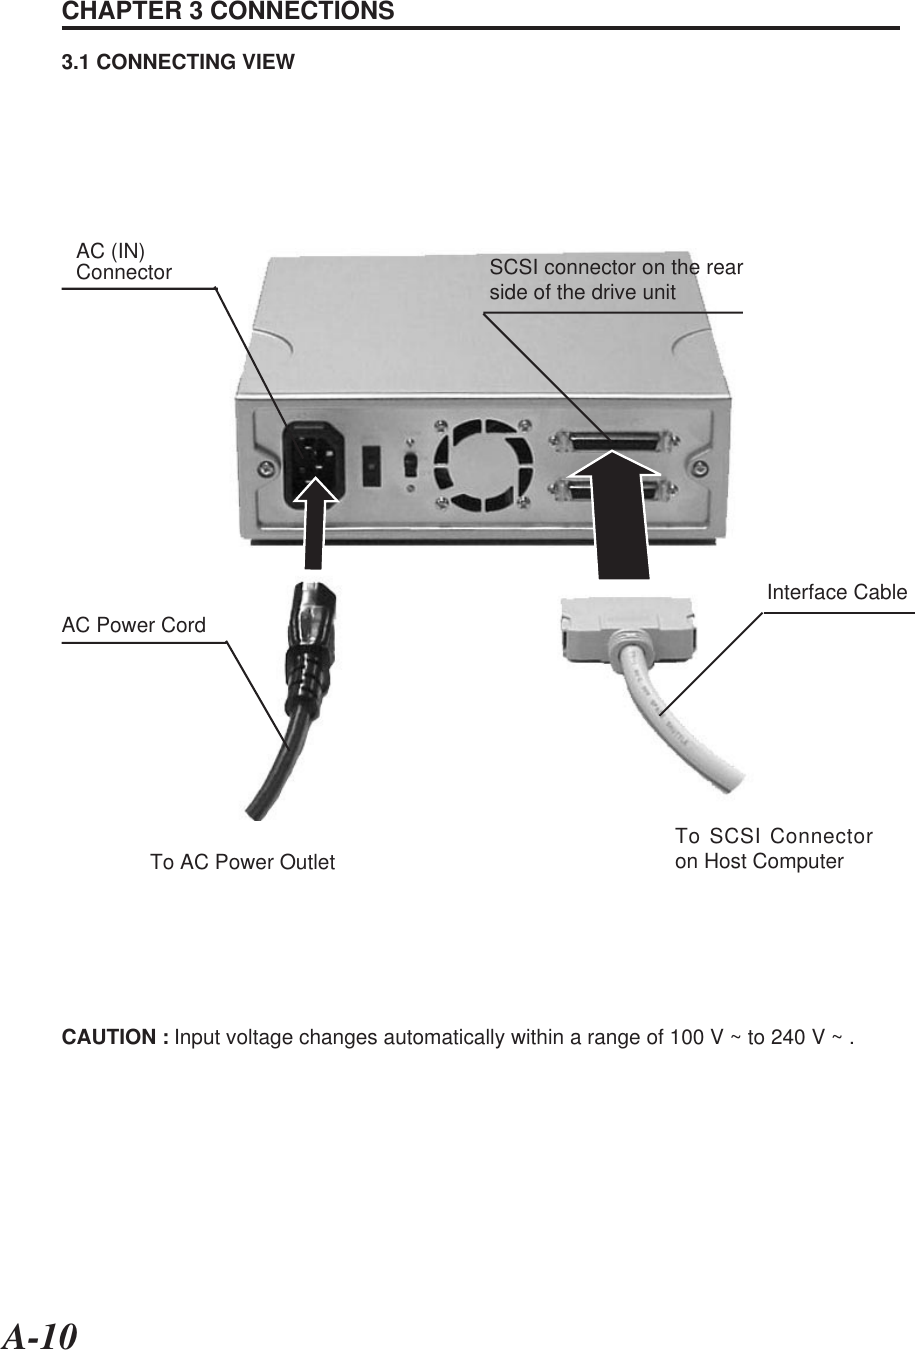 A-10CHAPTER 3 CONNECTIONS3.1 CONNECTING VIEWSCSI connector on the rearside of the drive unitAC (IN)ConnectorAC Power CordTo AC Power OutletInterface CableTo SCSI Connectoron Host ComputerCAUTION : Input voltage changes automatically within a range of 100 V ~ to 240 V ~ .